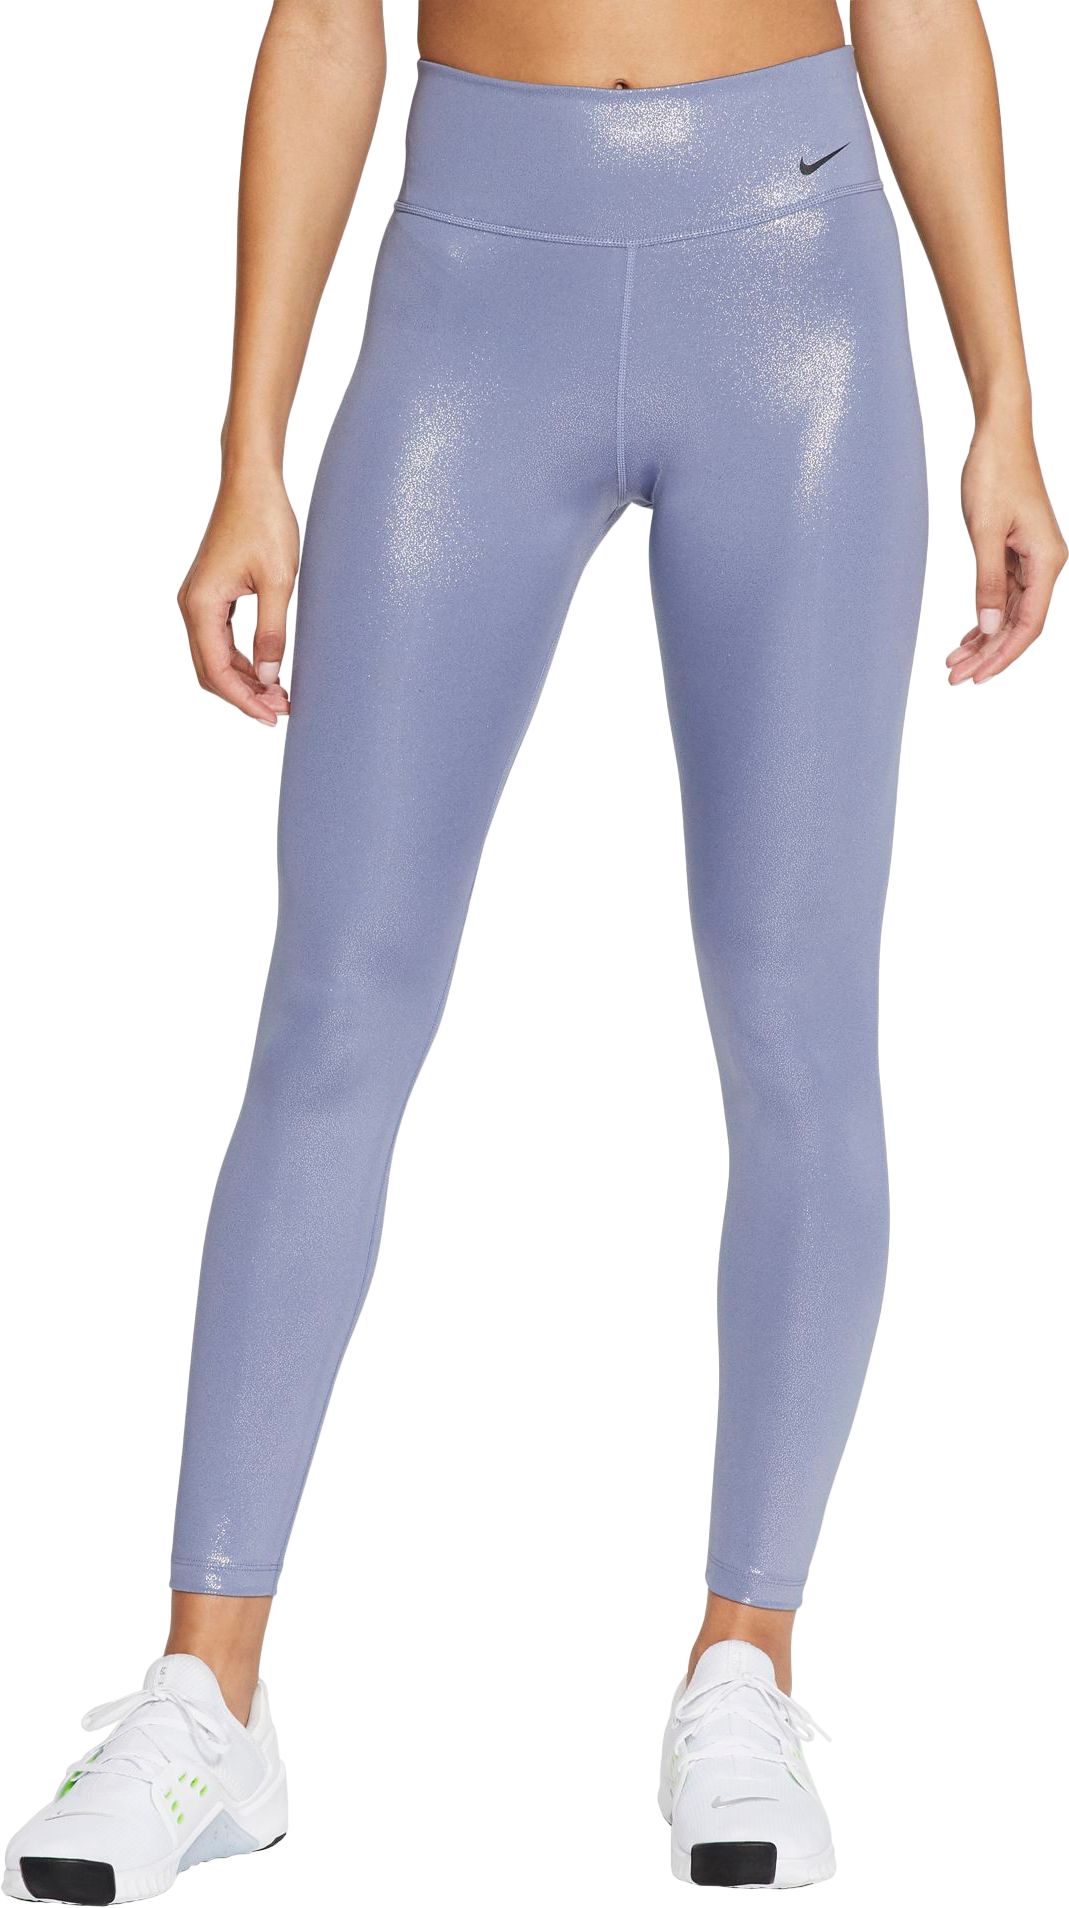 Nike Women's One Sparkle 7/8 Tights 